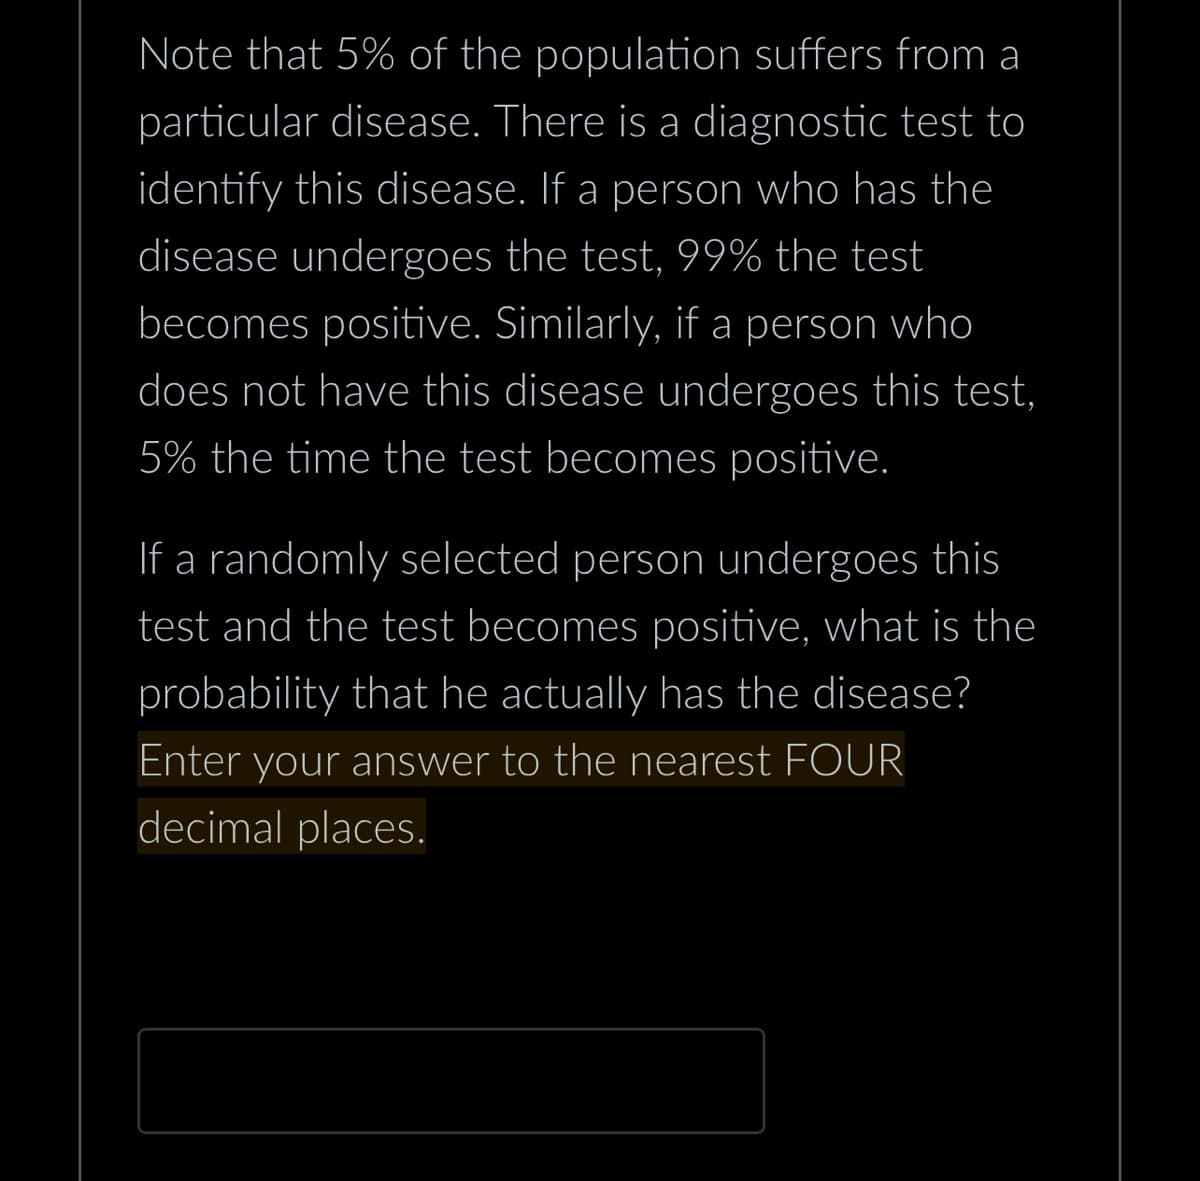 Note that 5% of the population suffers from a
particular disease. There is a diagnostic test to
identify this disease. If a person who has the
disease undergoes the test, 99% the test
becomes positive. Similarly, if a person who
does not have this disease undergoes this test,
5% the time the test becomes positive.
If a randomly selected person undergoes this
test and the test becomes positive, what is the
probability that he actually has the disease?
Enter your answer to the nearest FOUR
decimal places.